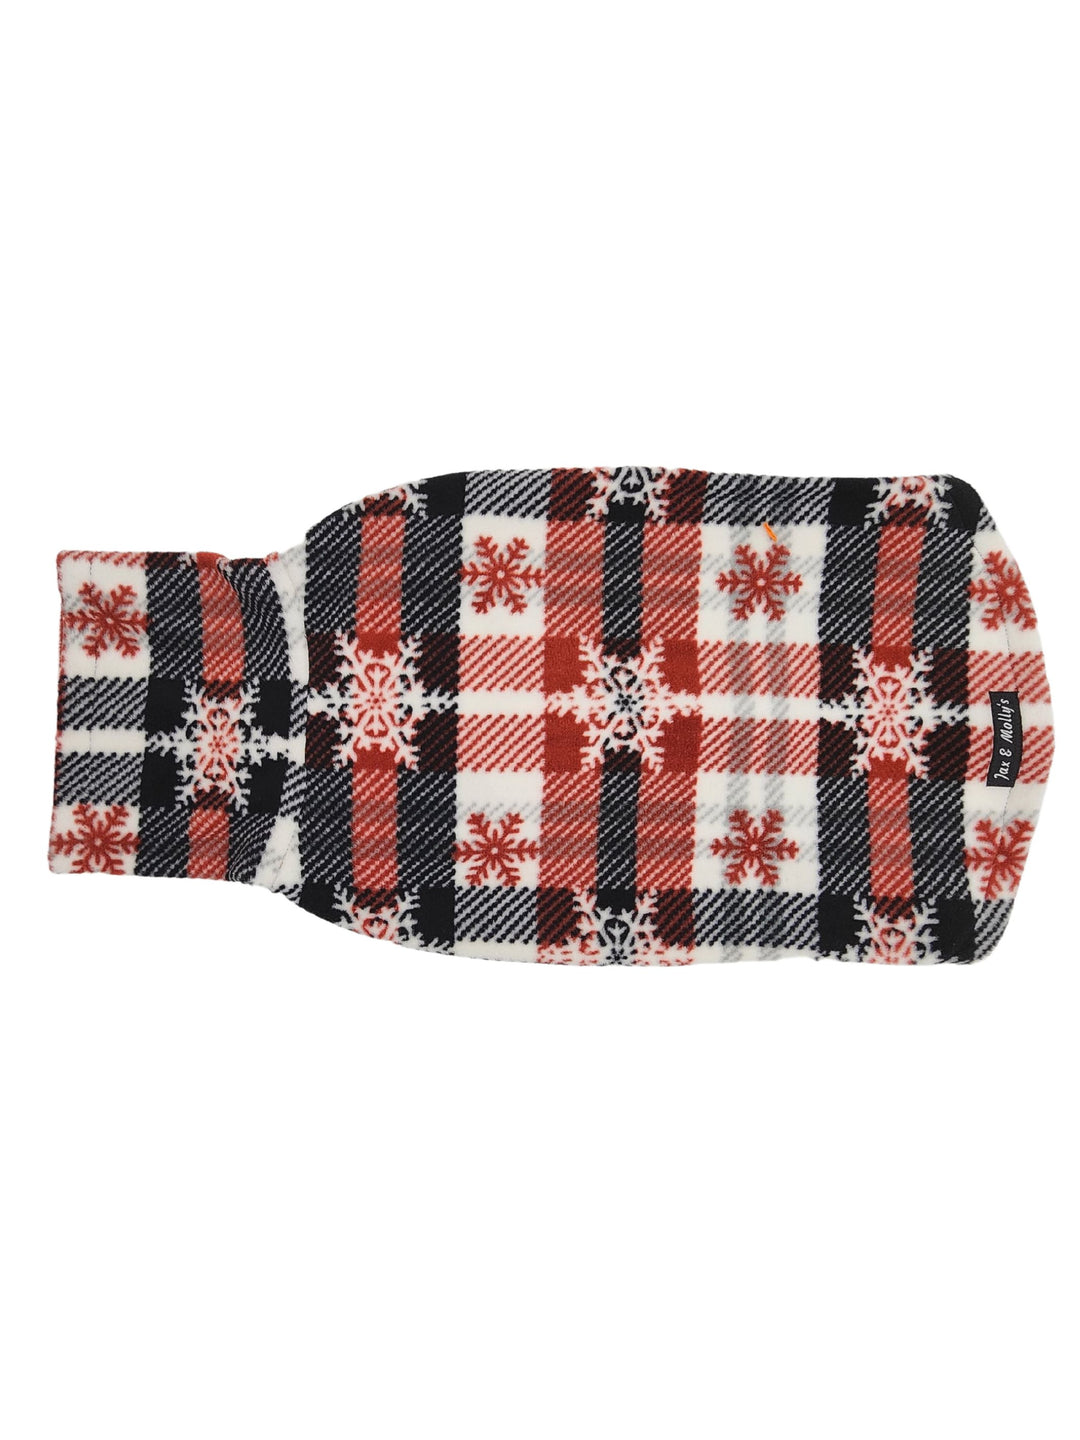 Jax & Molly's Triflurry Dog Sweater in red, white and black plaid with snowflake print